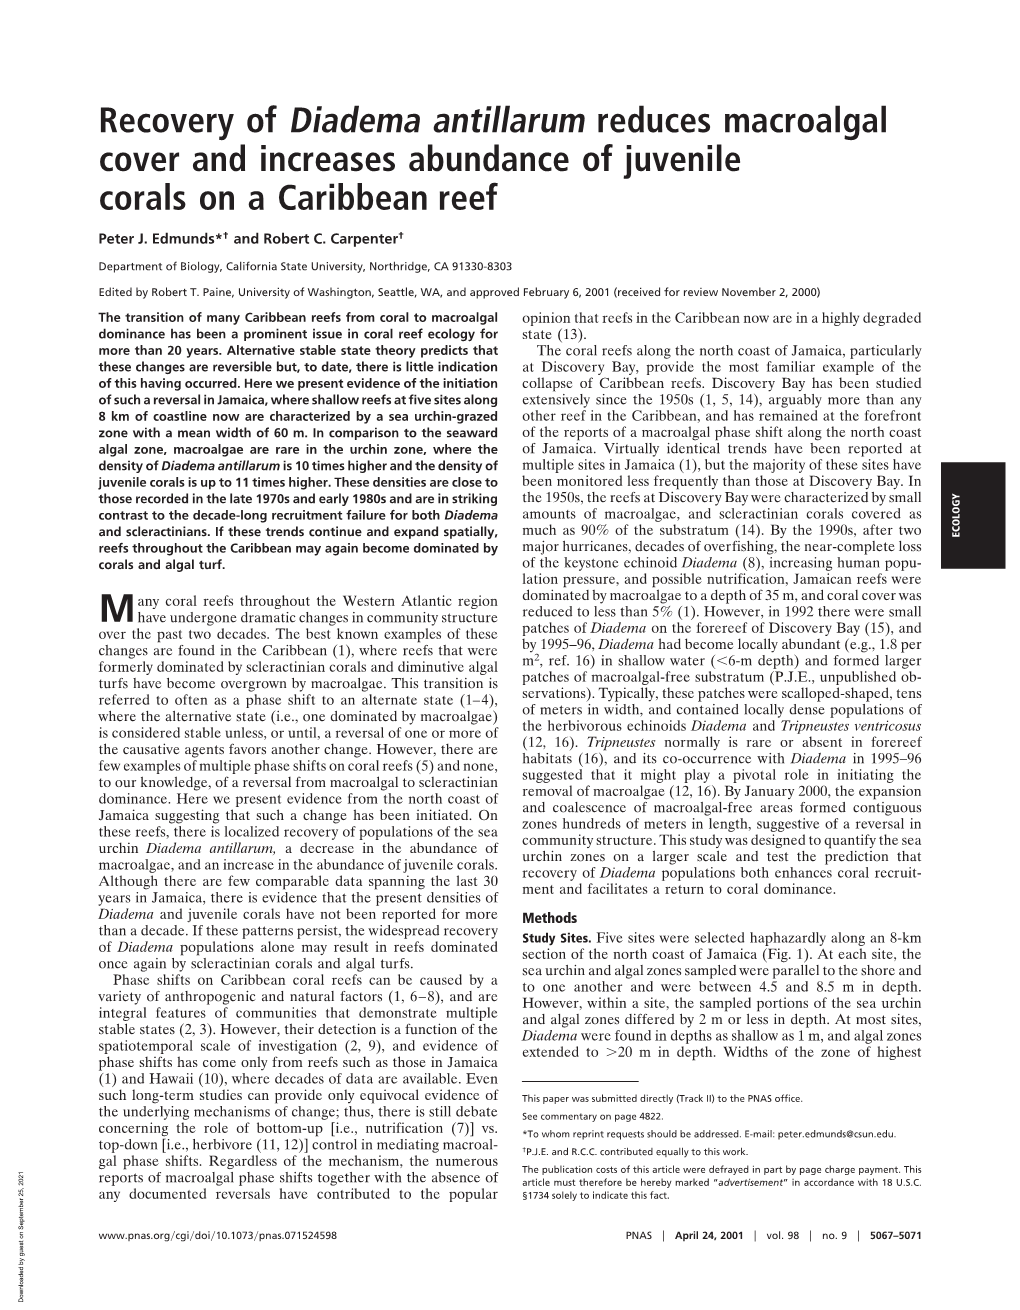 Recovery of Diadema Antillarum Reduces Macroalgal Cover and Increases Abundance of Juvenile Corals on a Caribbean Reef